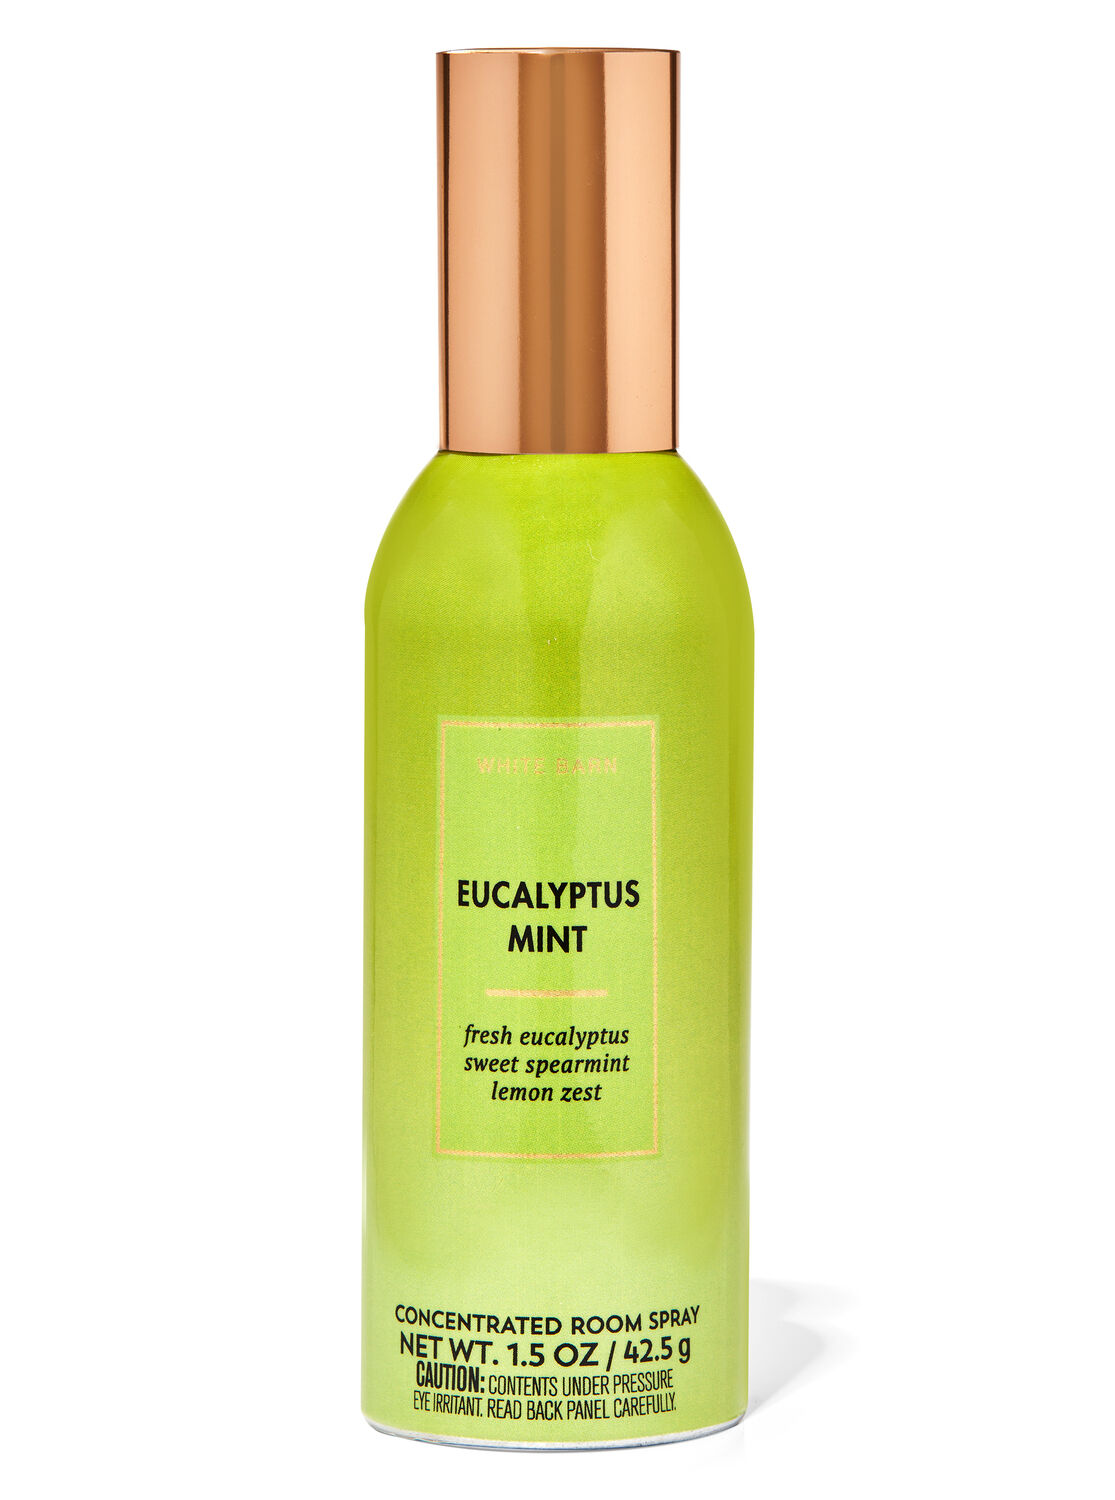 Eucalyptus Mint Concentrated Room Spray